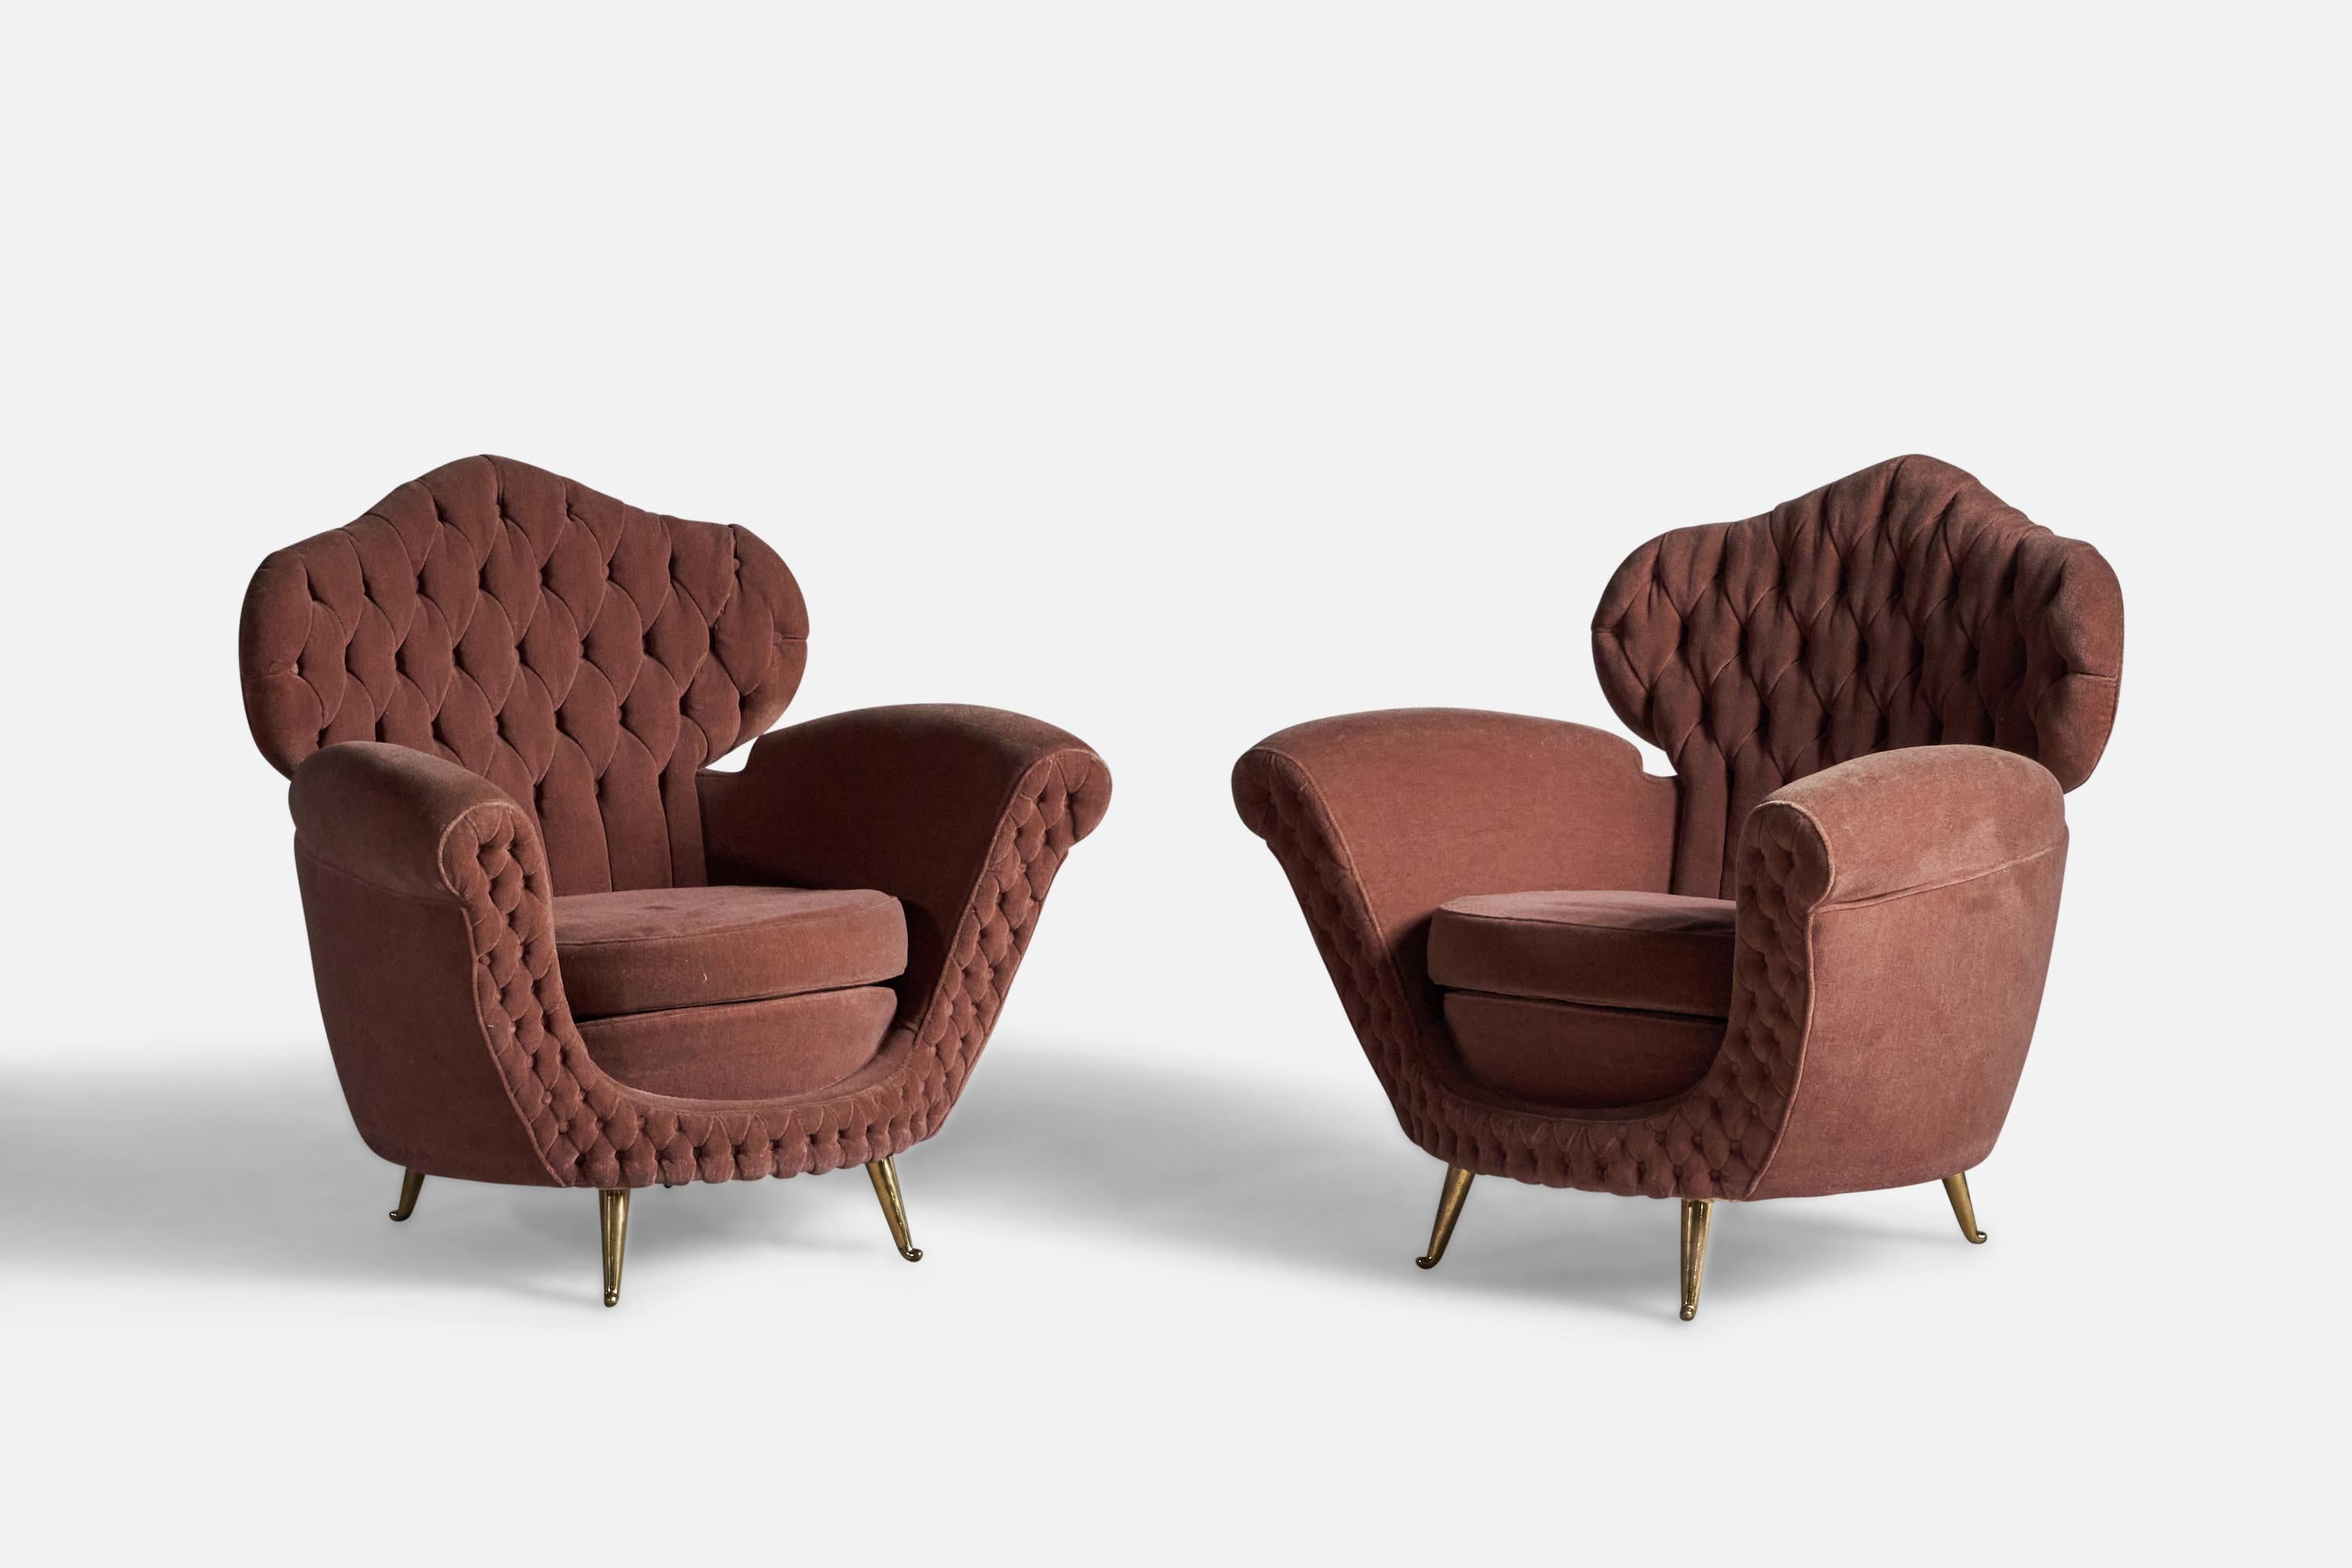 A pair of fabric and brass lounge chairs, designed and produced in Italy, c. 1940s.